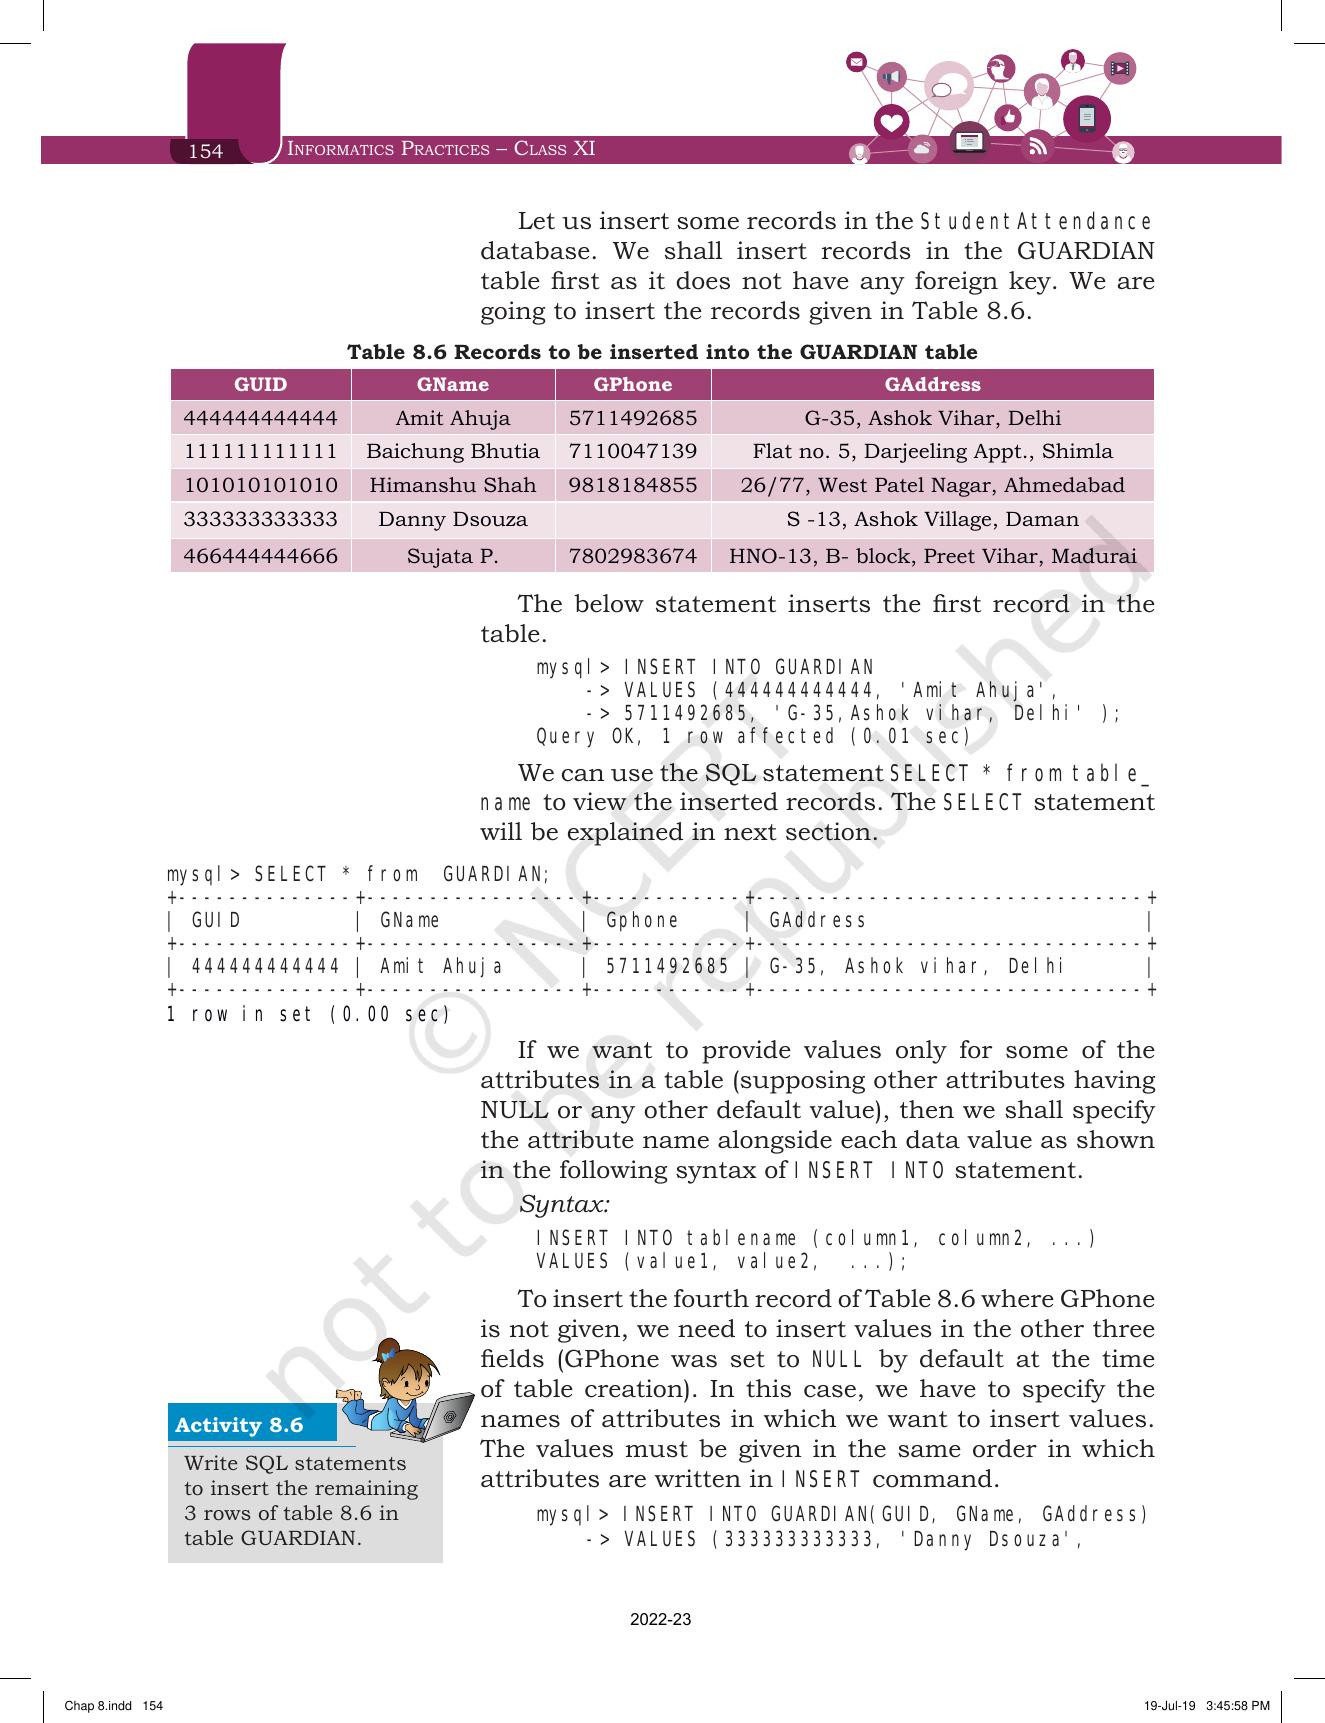 NCERT Book for Class 11 Informatics Practices Chapter 8 Introduction to Structured Query Language (SQL) - Page 12